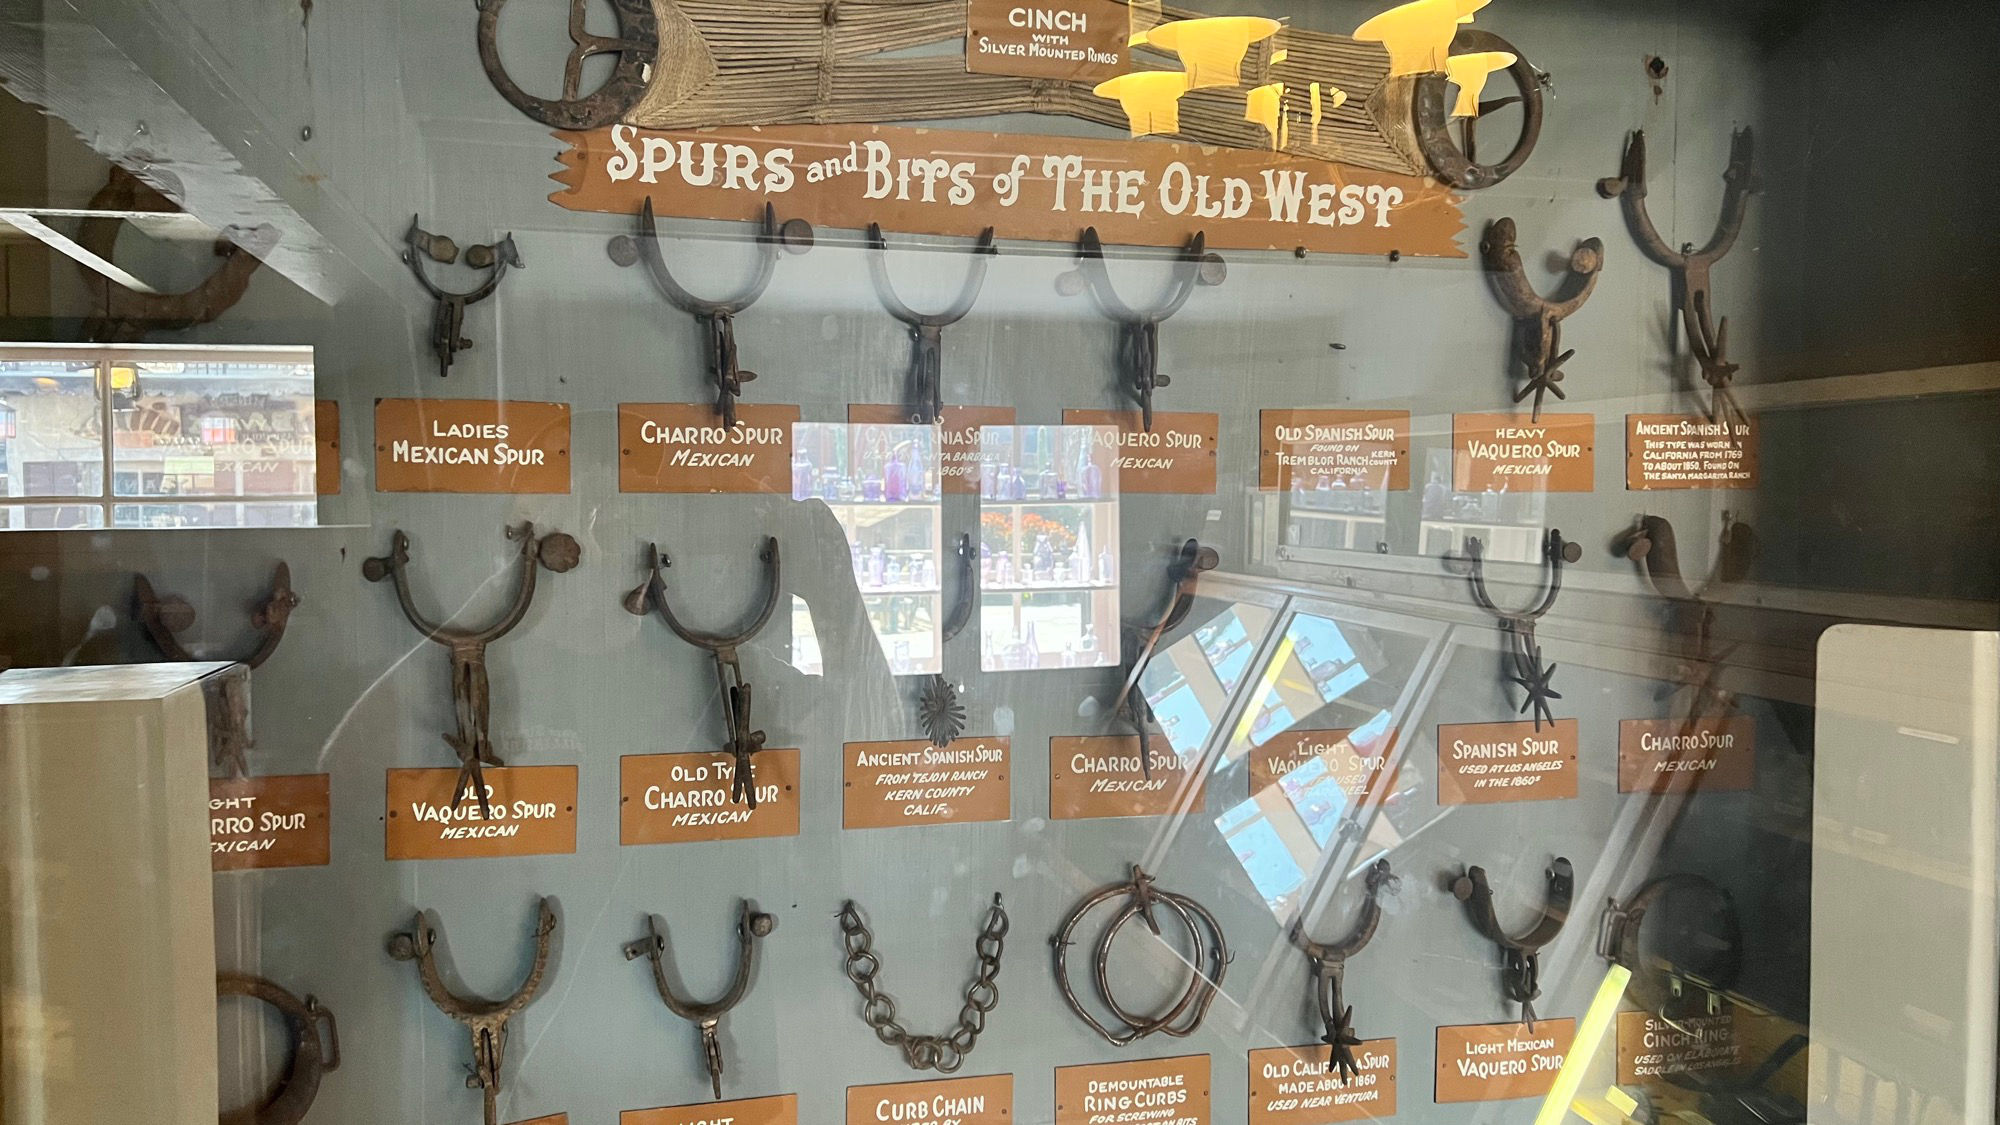 Spurs and Bits of The Old West